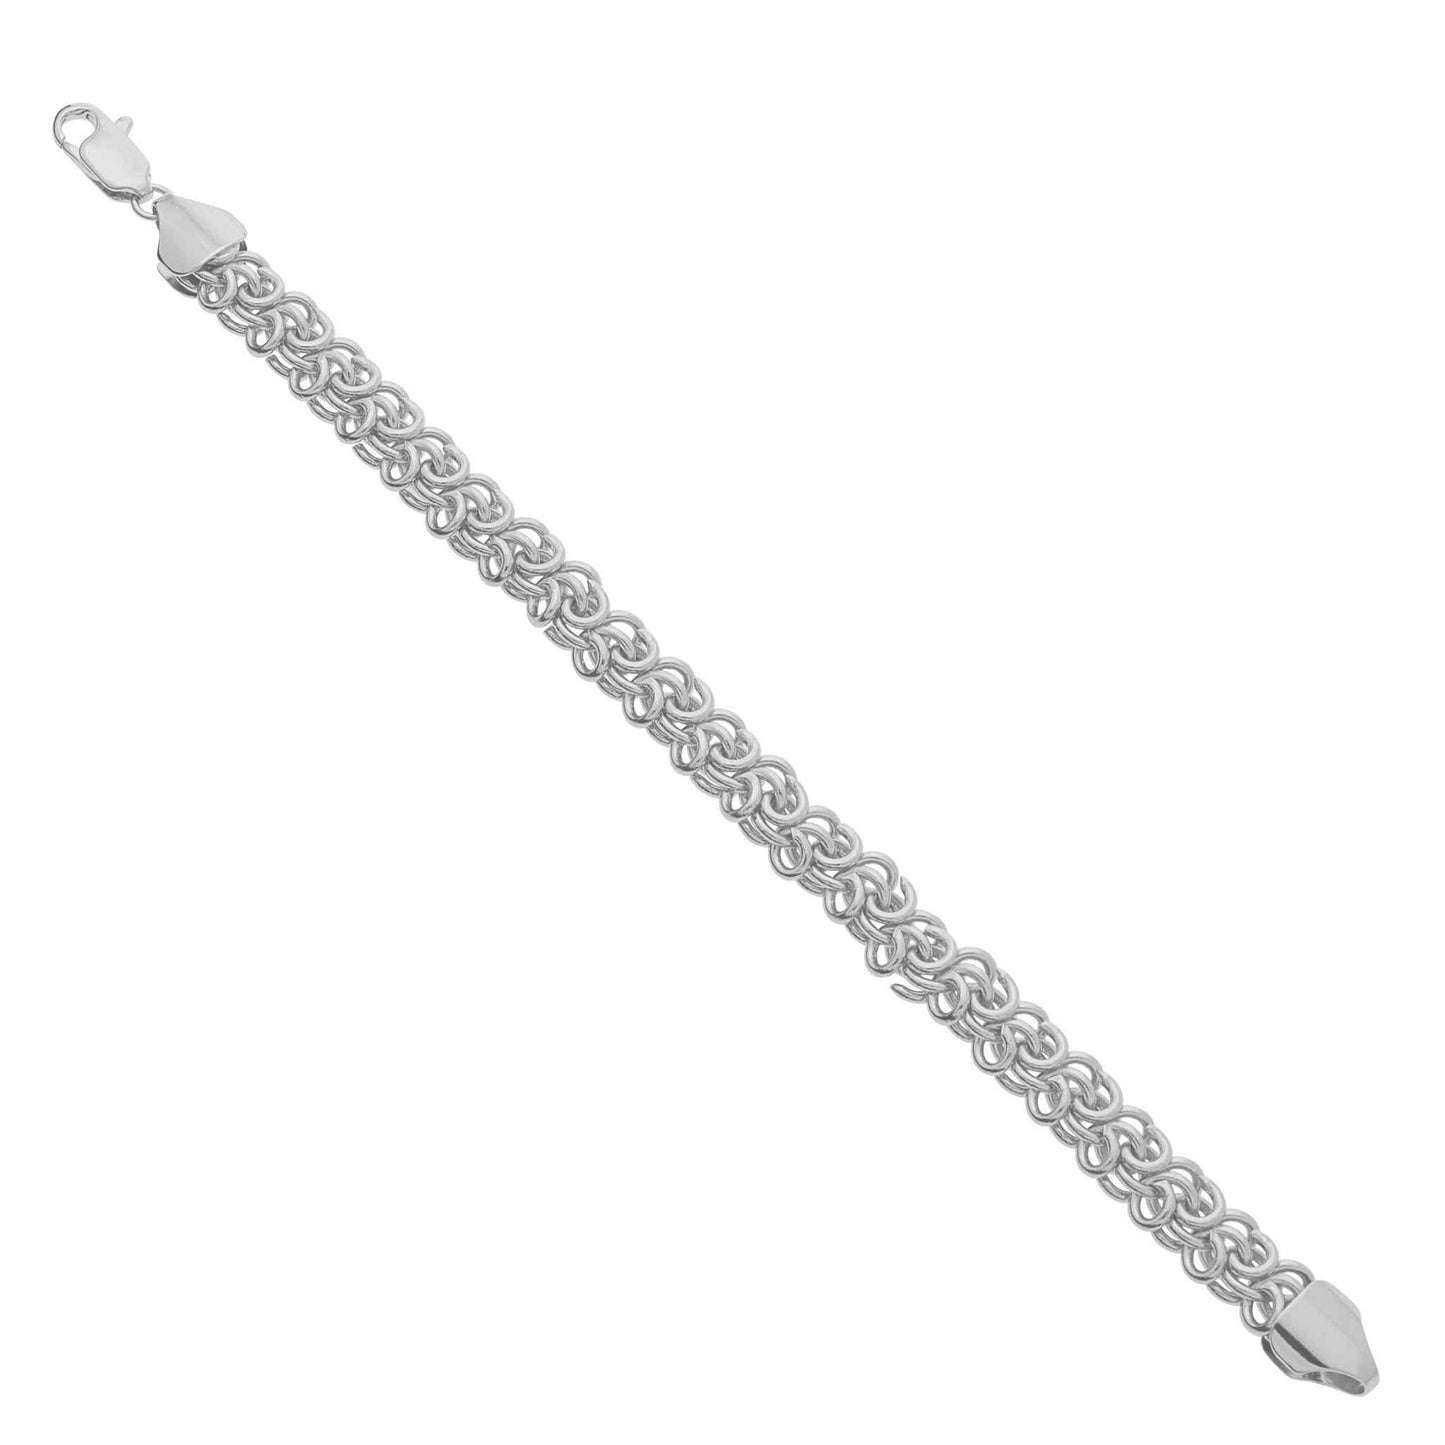 A arabesque bracelet displayed on a neutral white background.